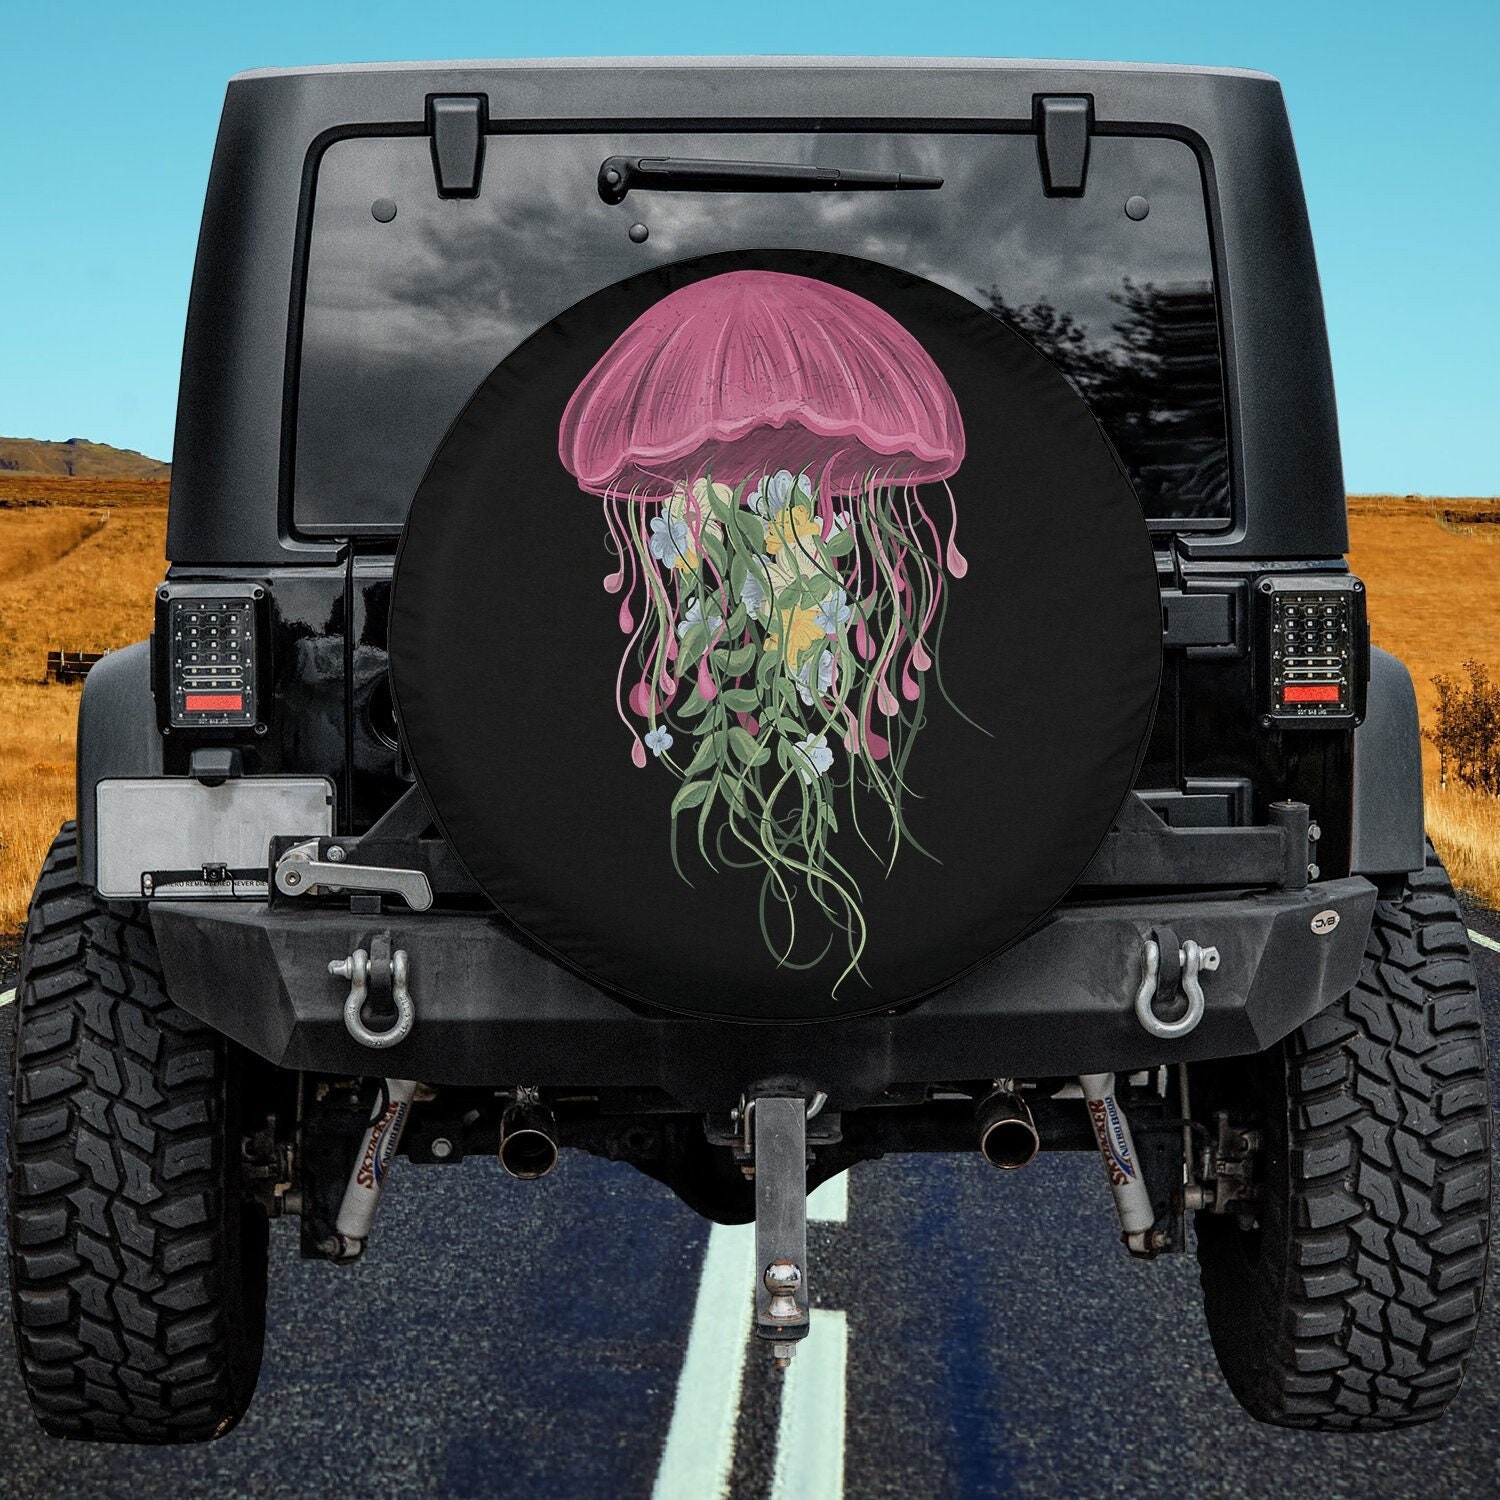 Cows Curiosity Tire Cover 14 inch Waterproof Dust-Proof Universal Spare Tire Wheel Cover Fit for Jeep RV SUV Camper Trailer Accessories - 2